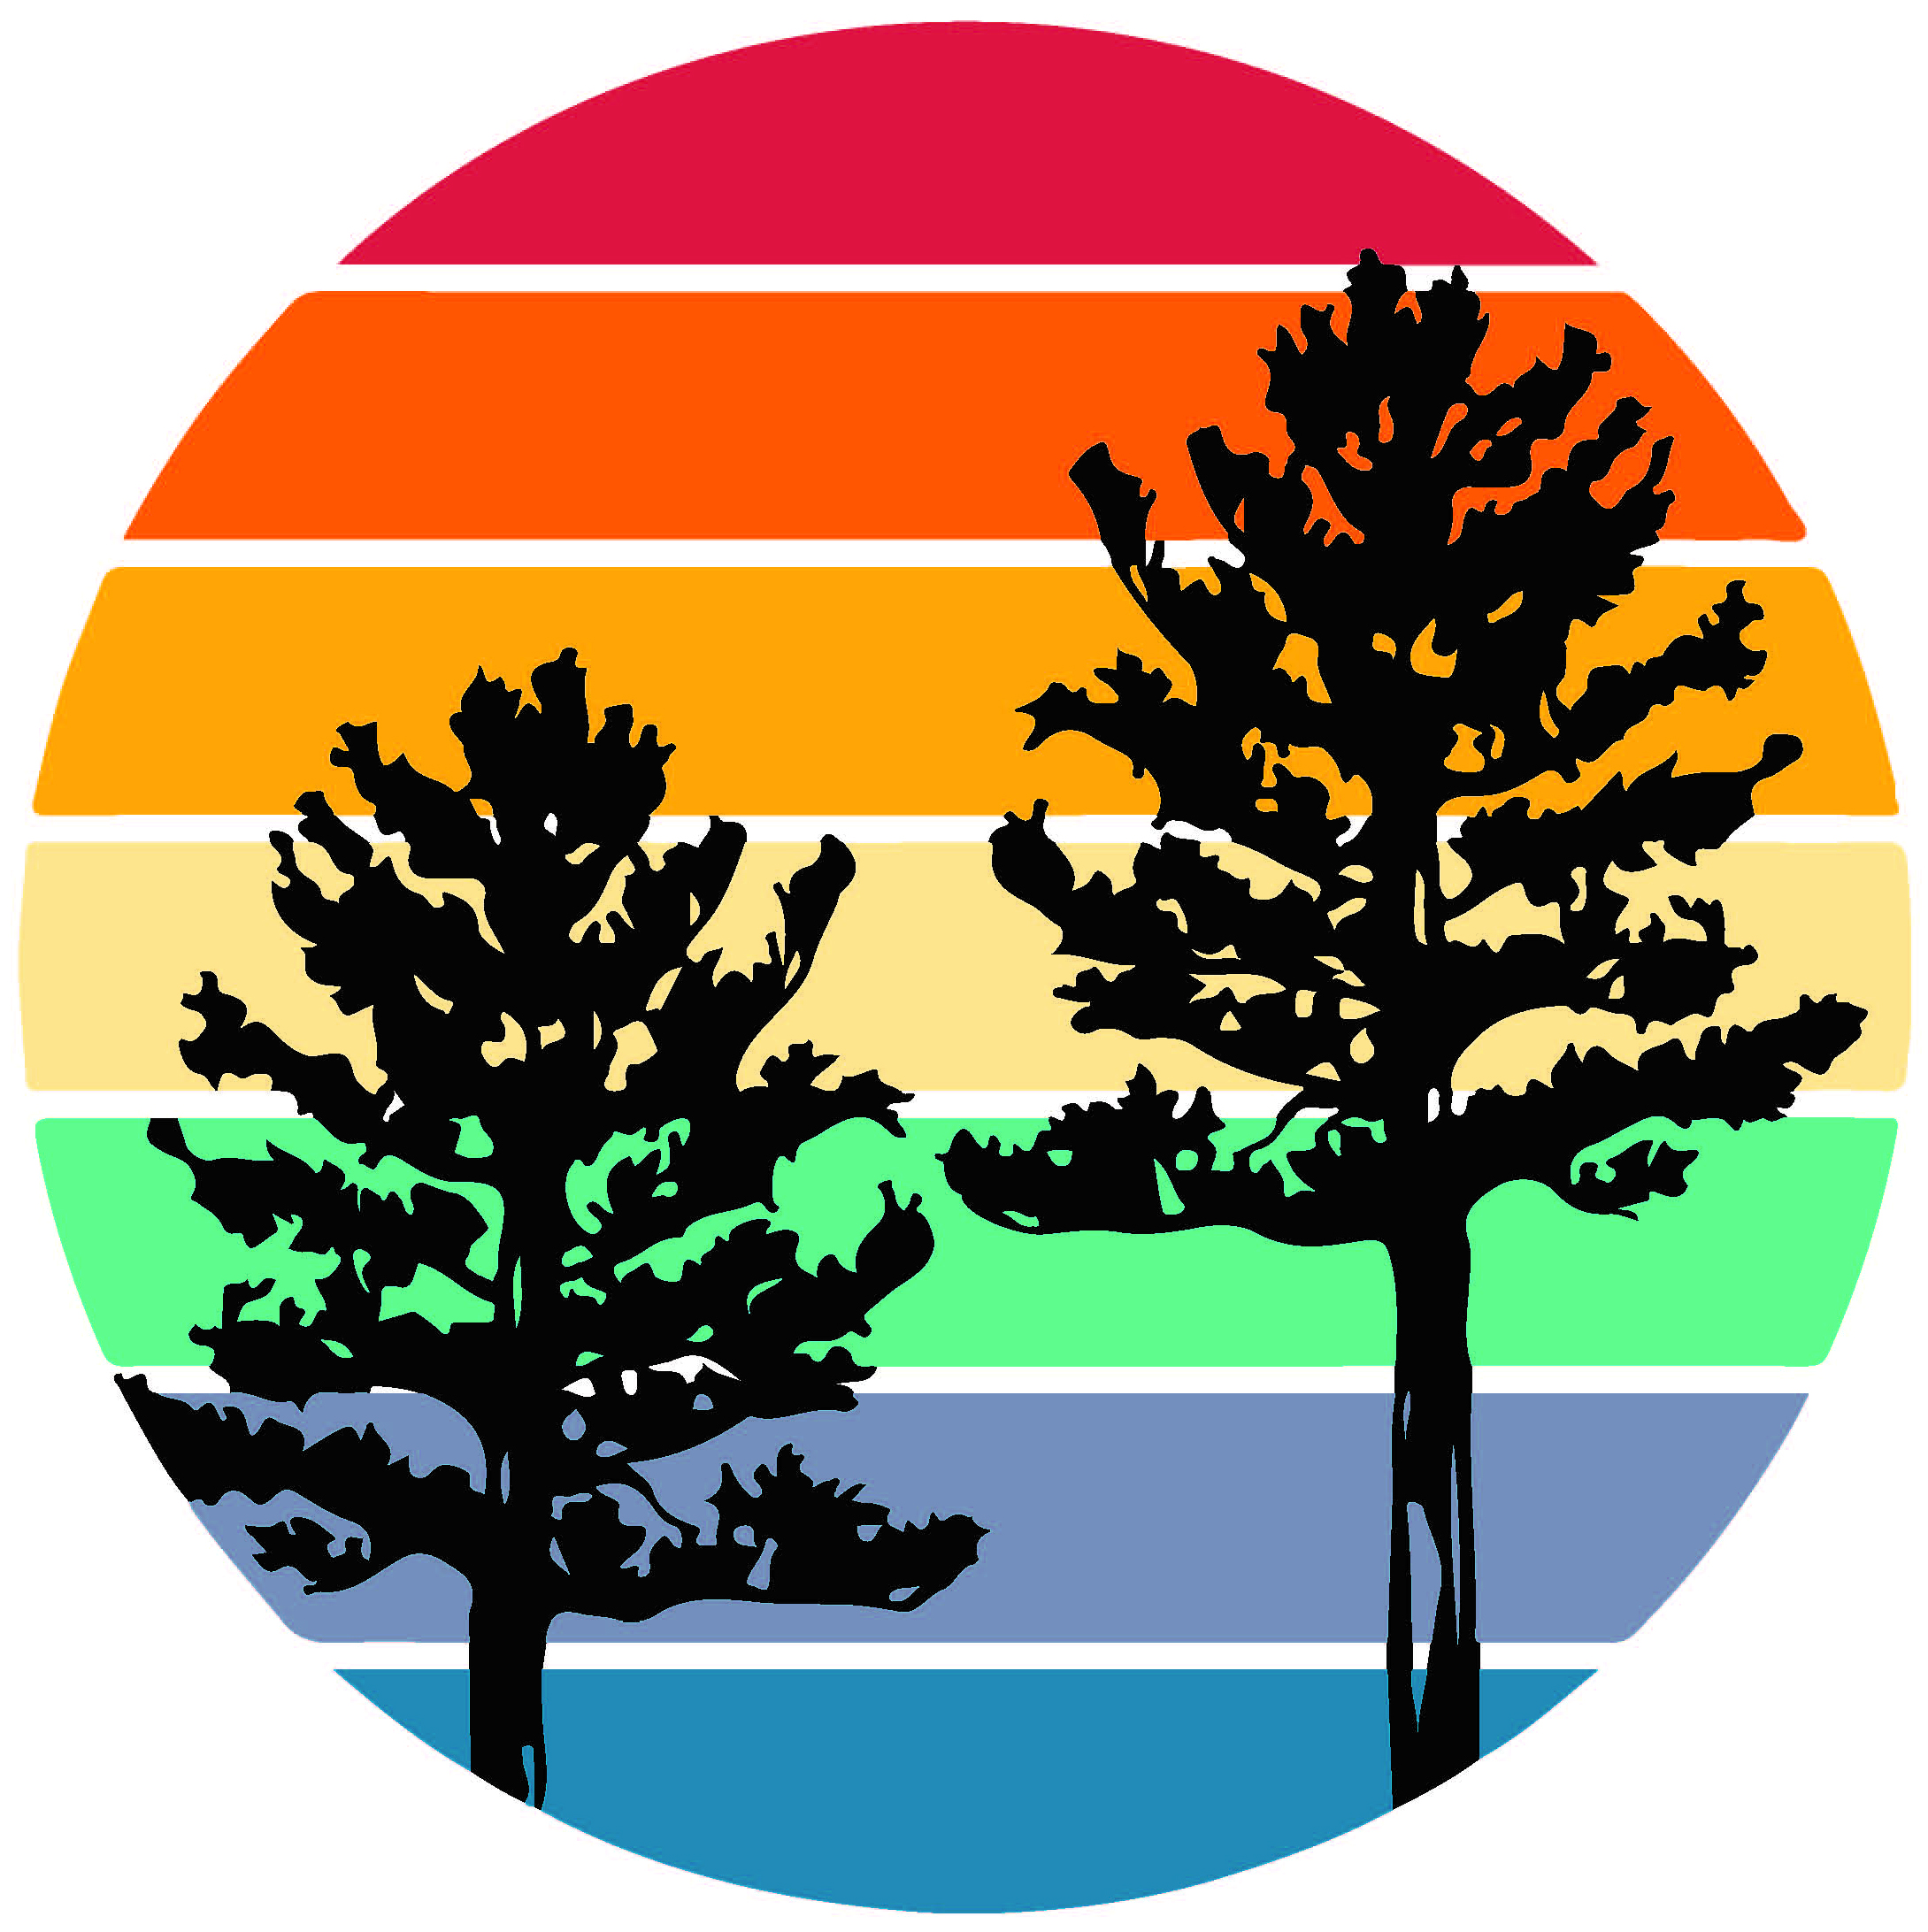 Collective Copies 40th Anniversary Color logo featuring our cooperative Twin Pines logo in color. Black Pine trees against a rainbow-colored ombre Sunset